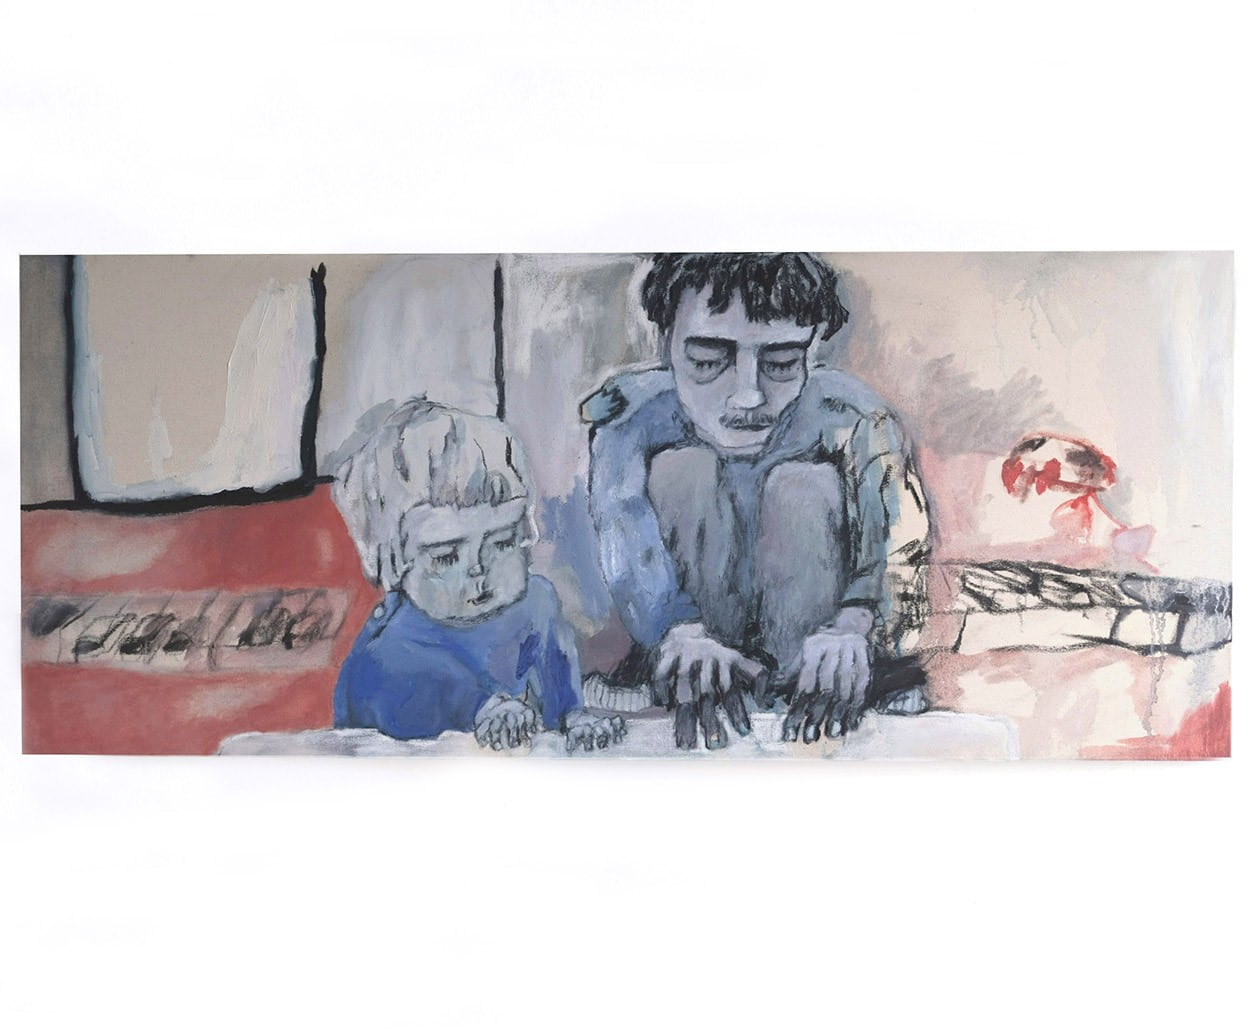 A painting of two people sitting on the floor.